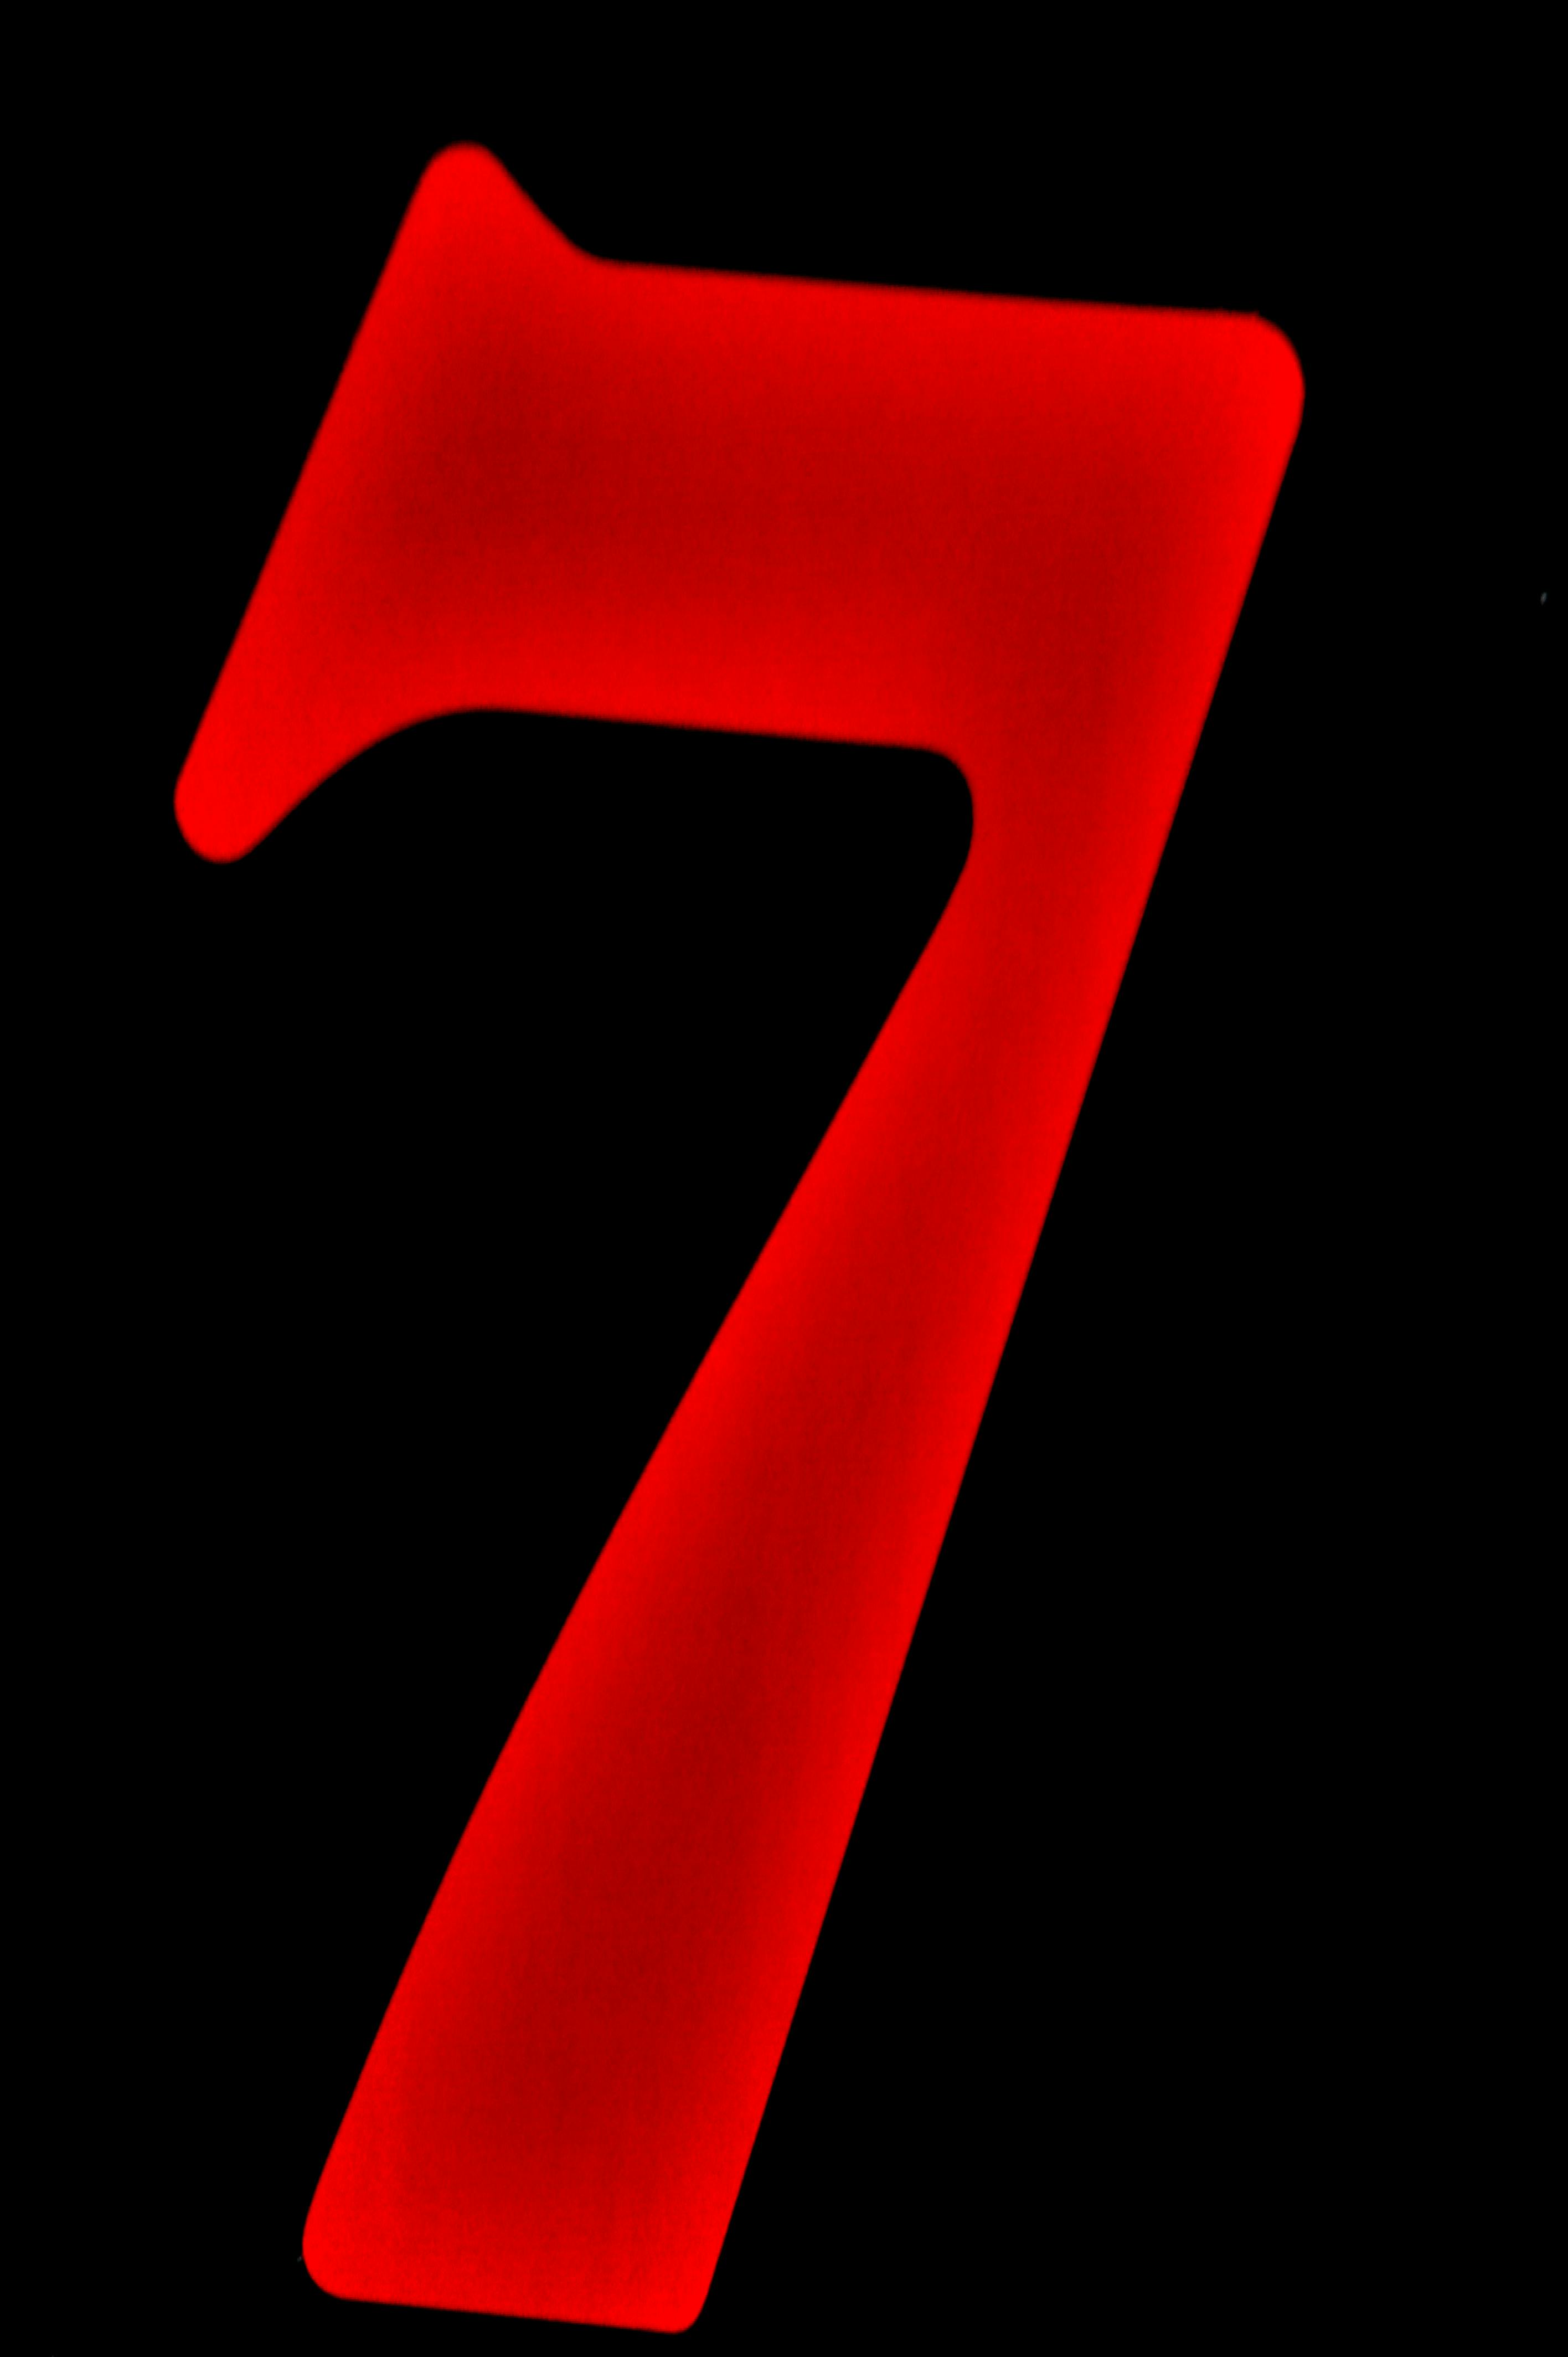 Free stock photo of number 7, number seven, red seven